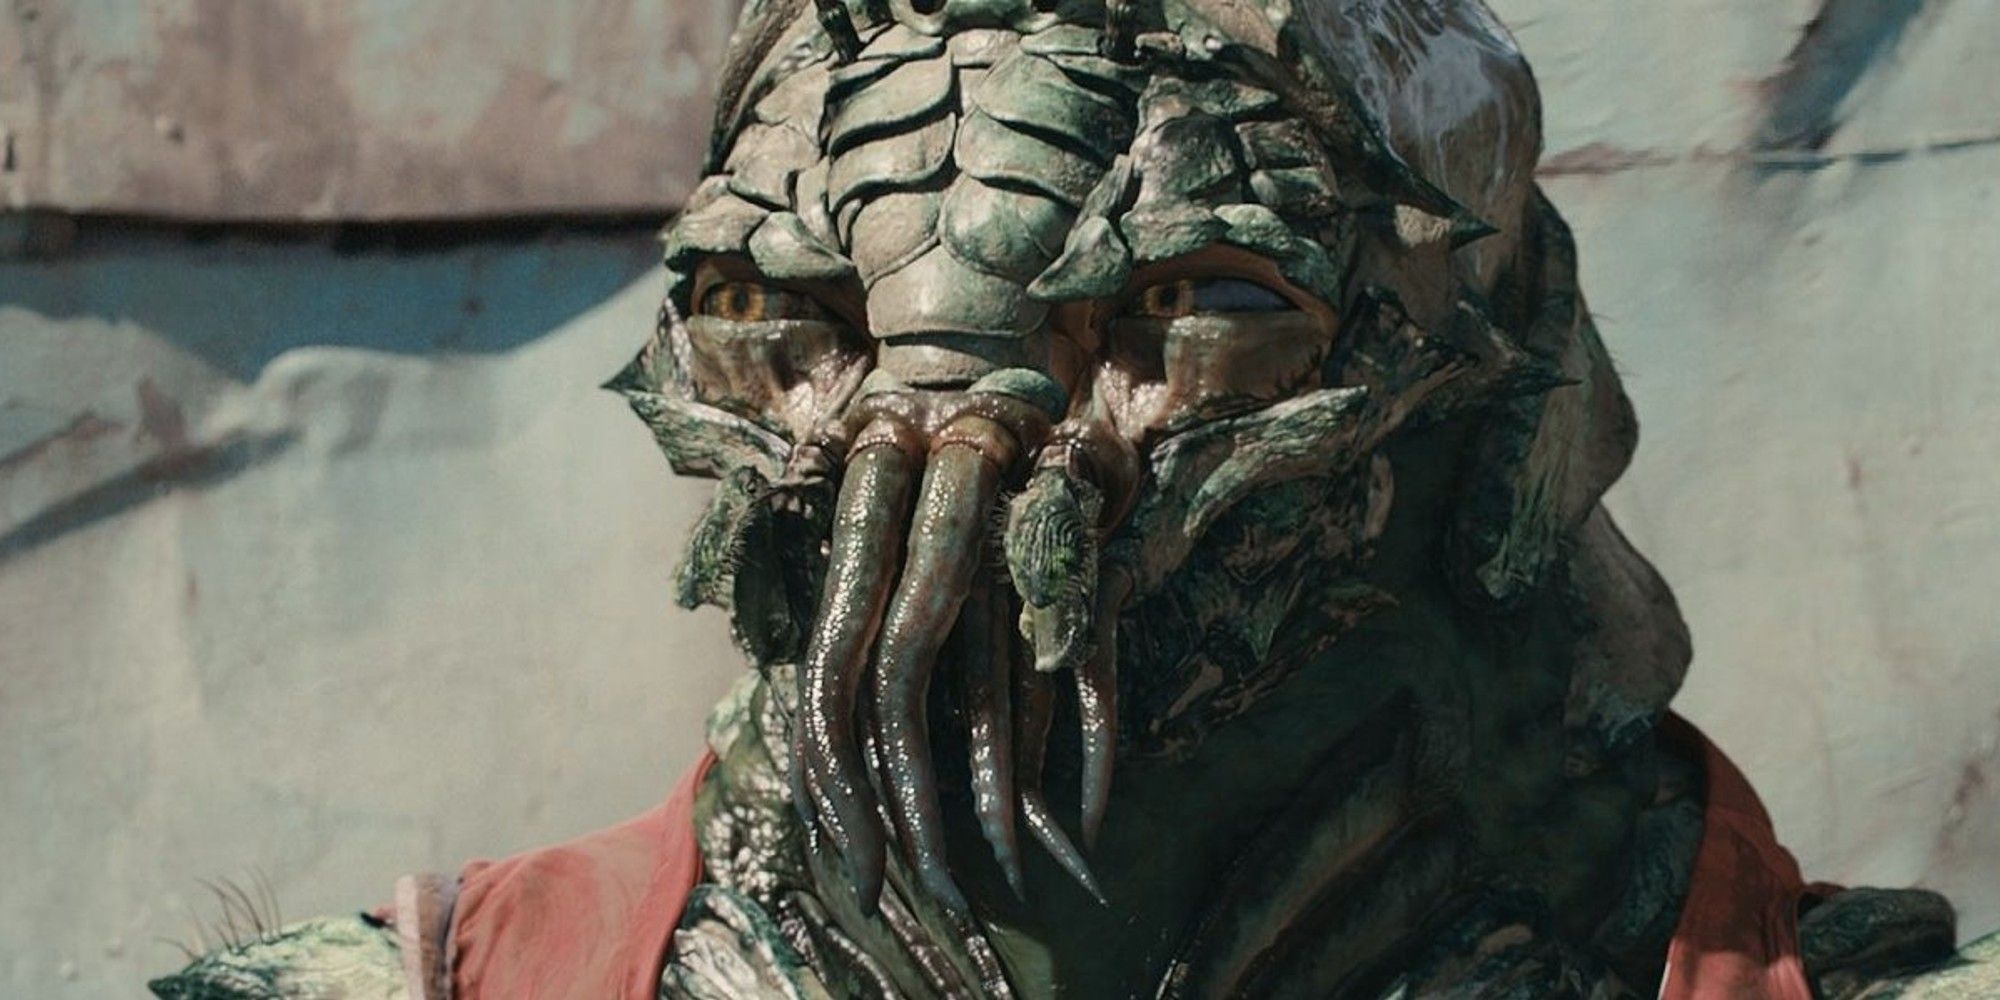 A close-up of an Alien in 'District 9'